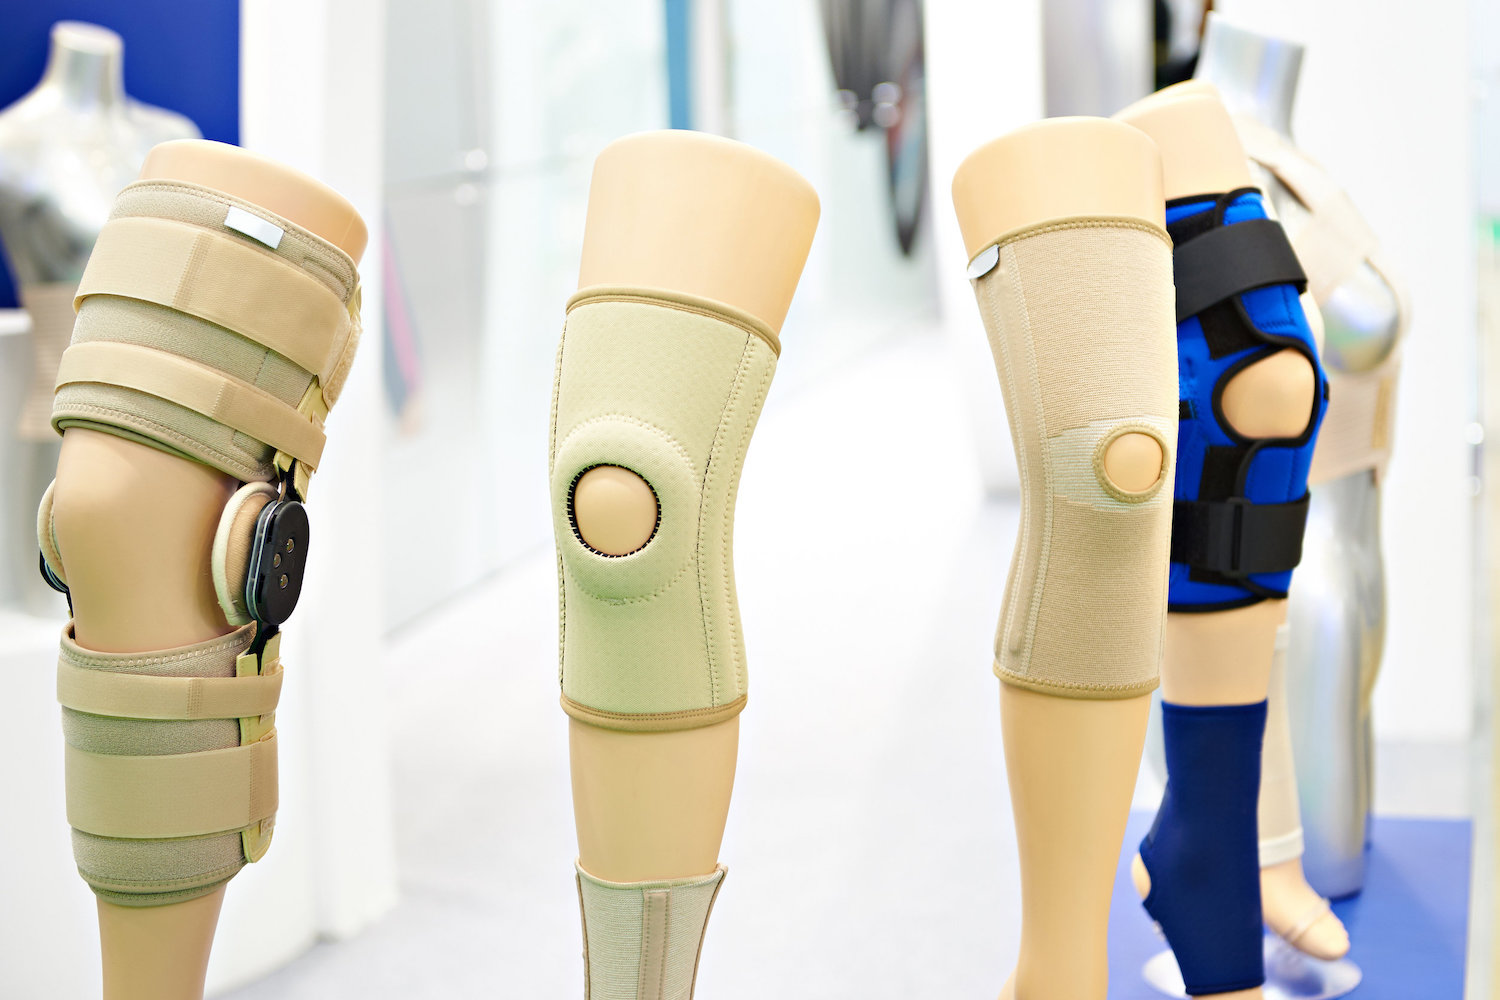 Featured image for “Can Knee Braces Really Help with Knee Pain?”